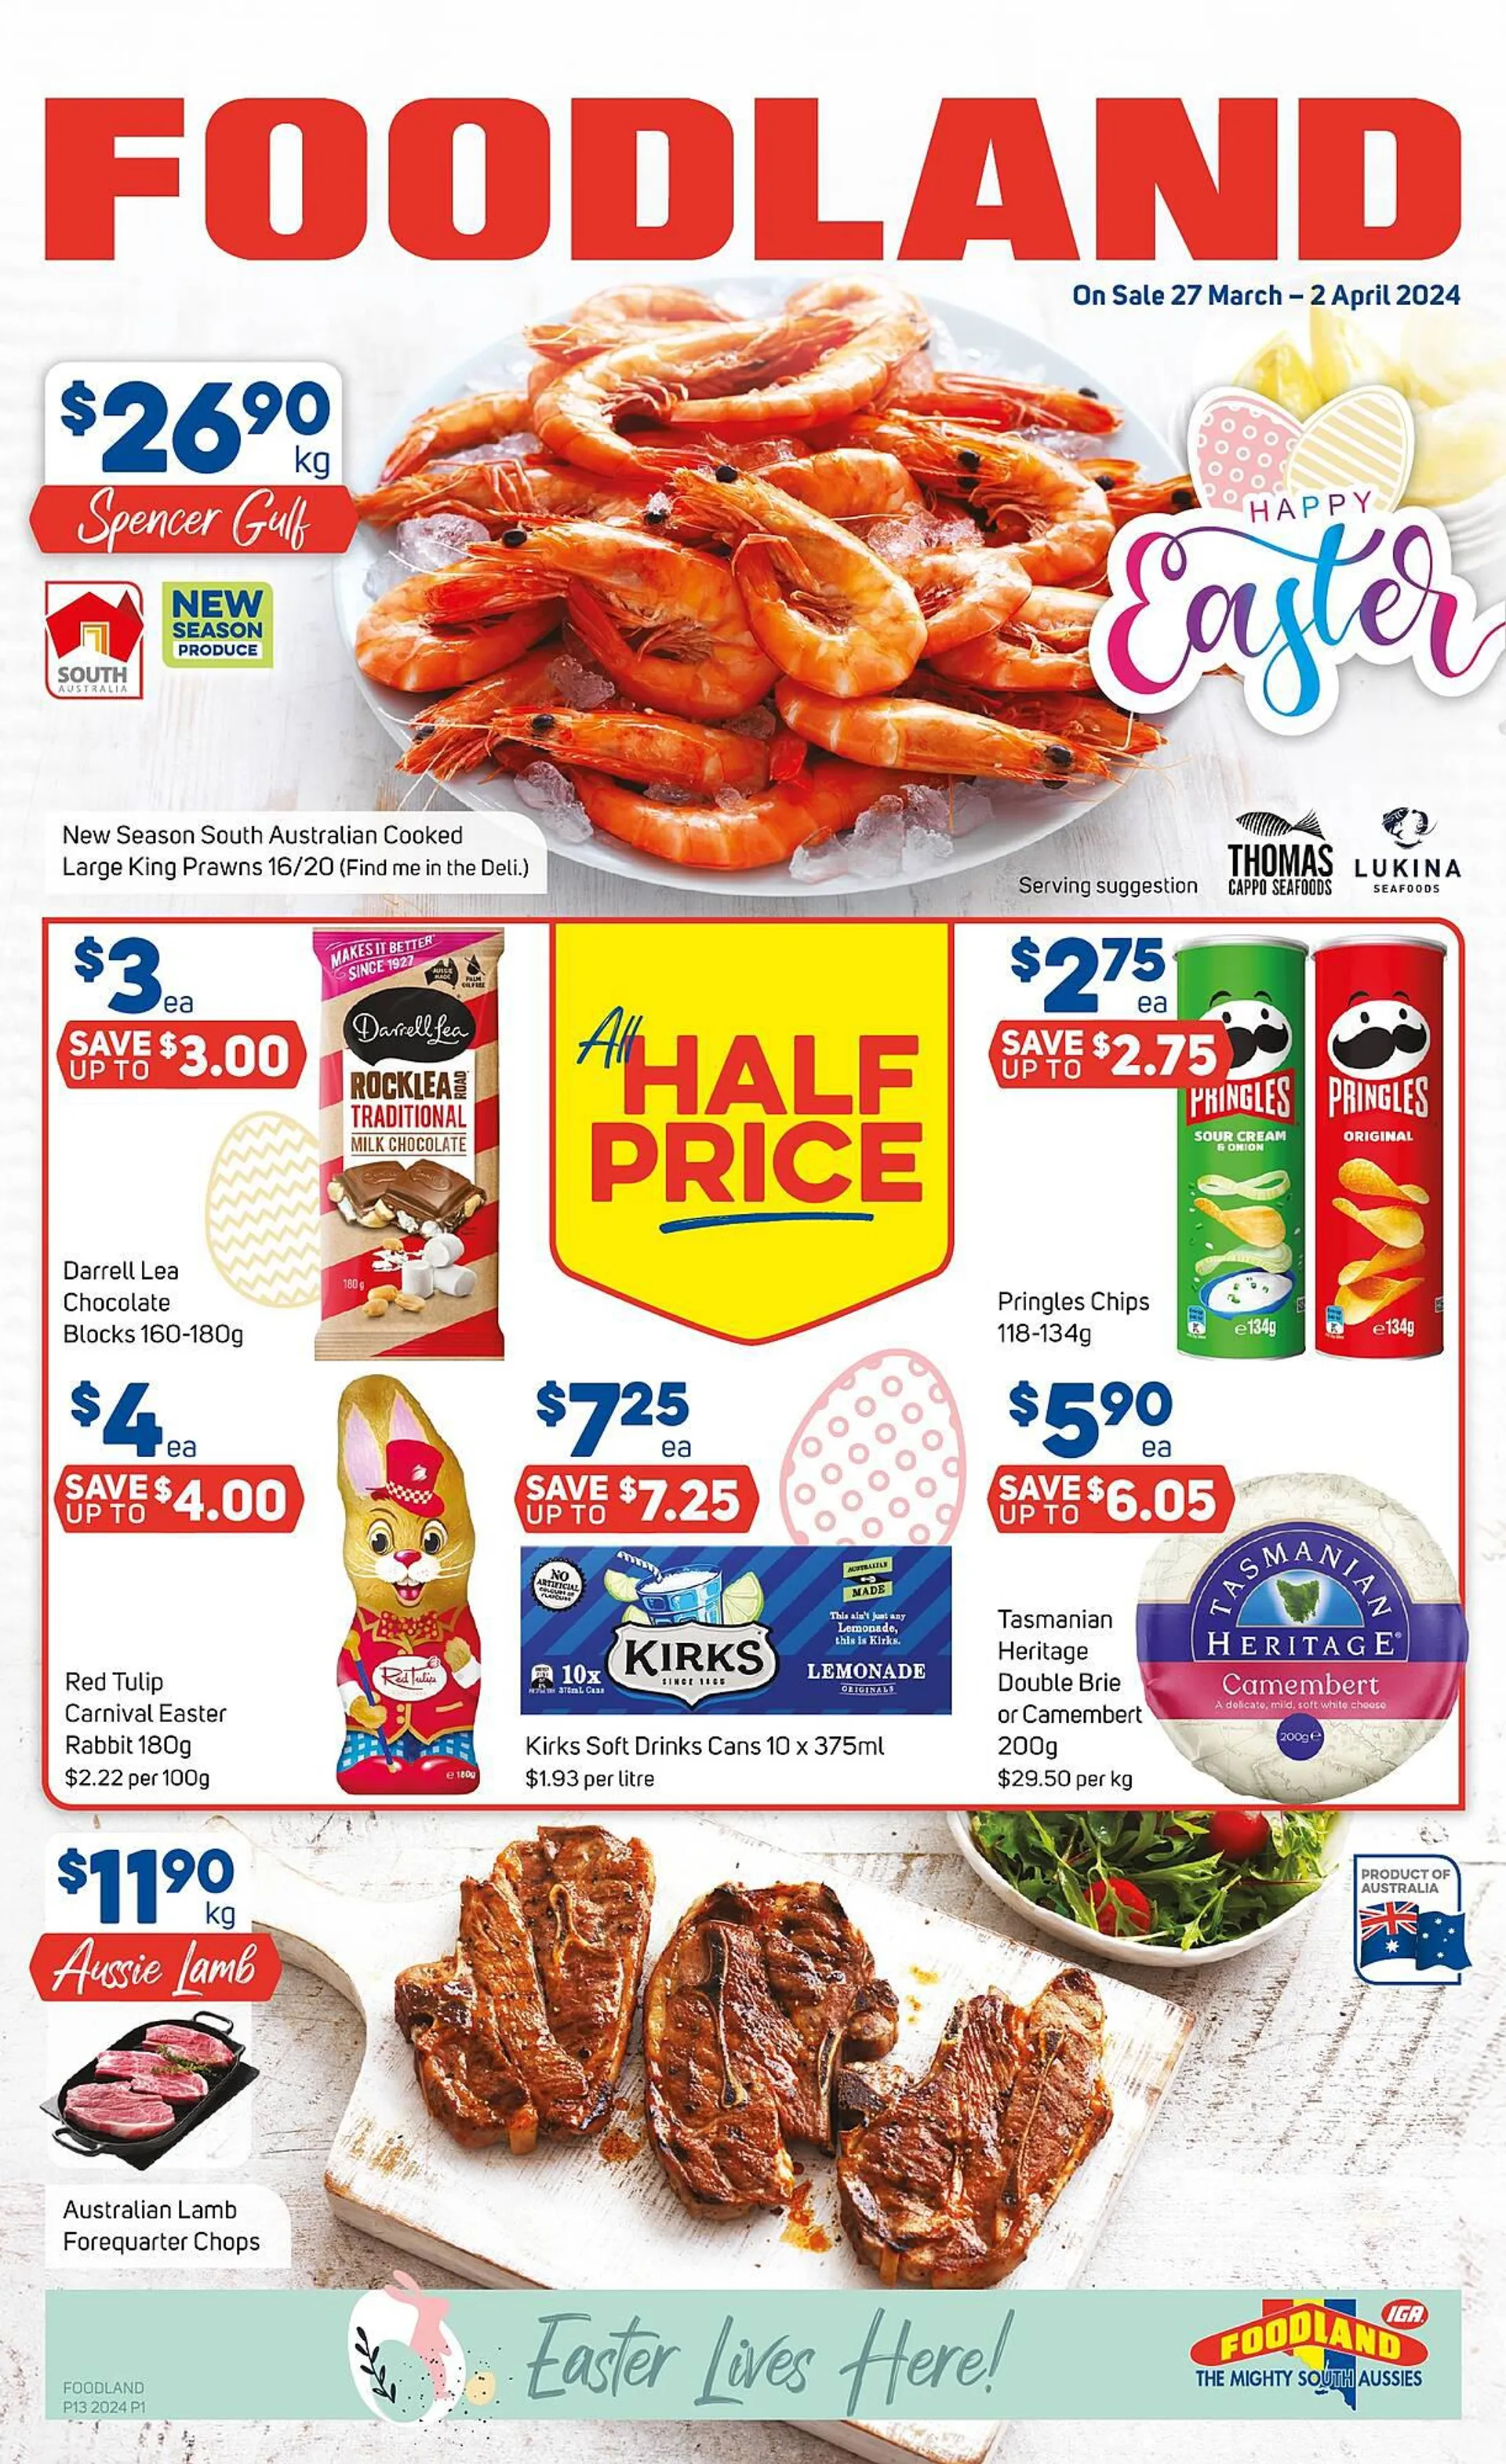 Foodland catalogue - Catalogue valid from 27 March to 2 April 2024 - page 1